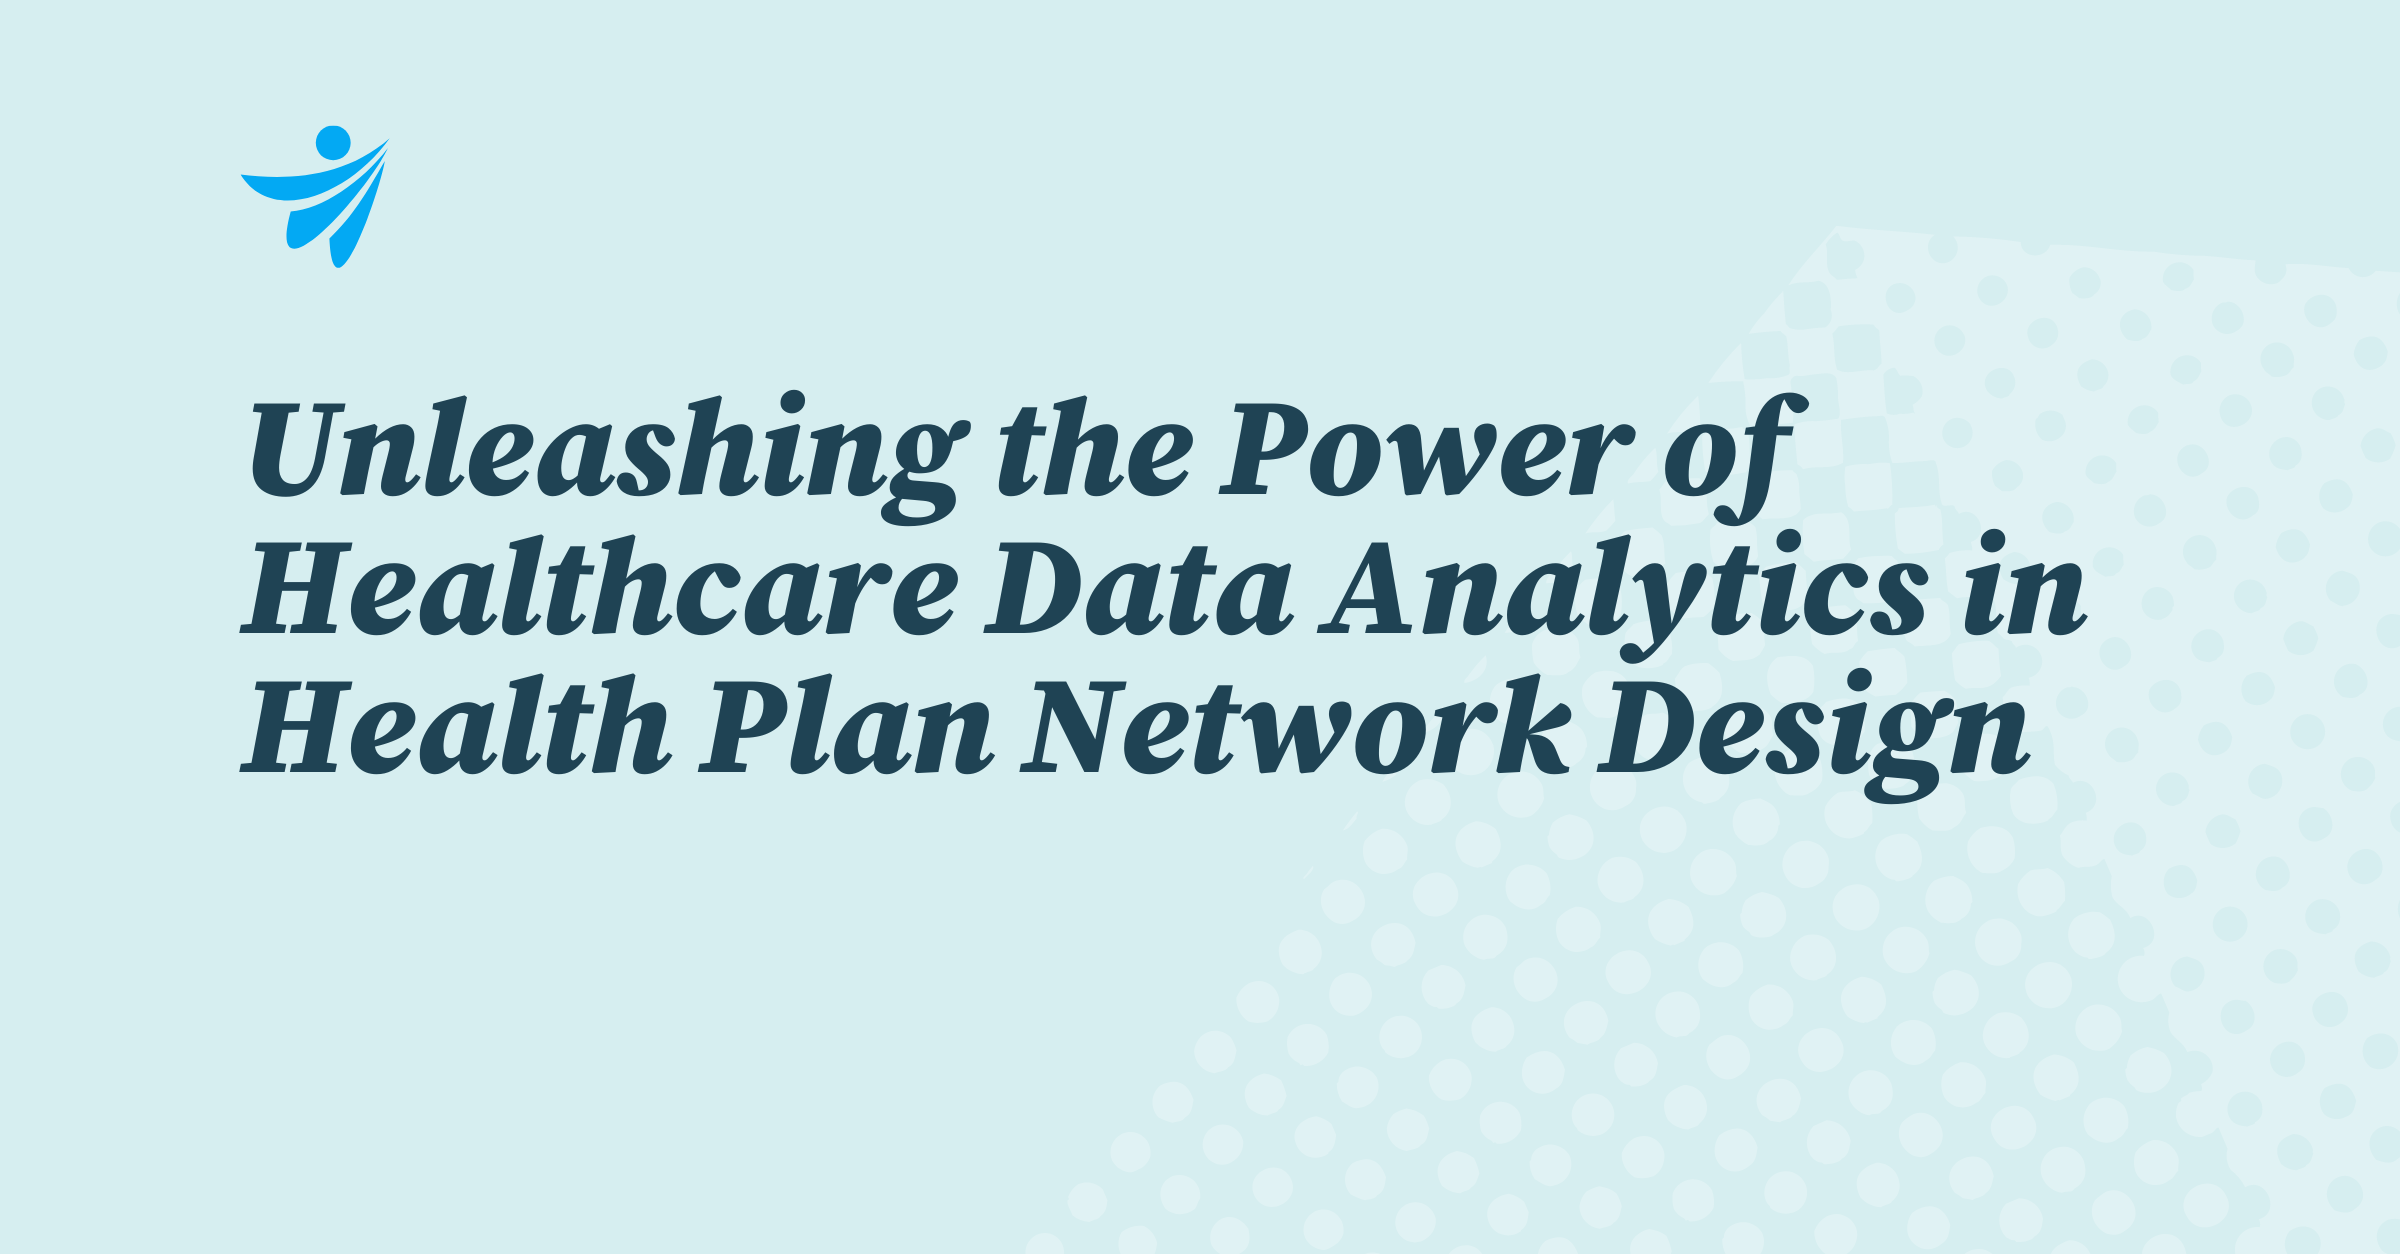 Thumbnail for Unleashing the Power of Healthcare Data Analytics in Health Plan Network Design